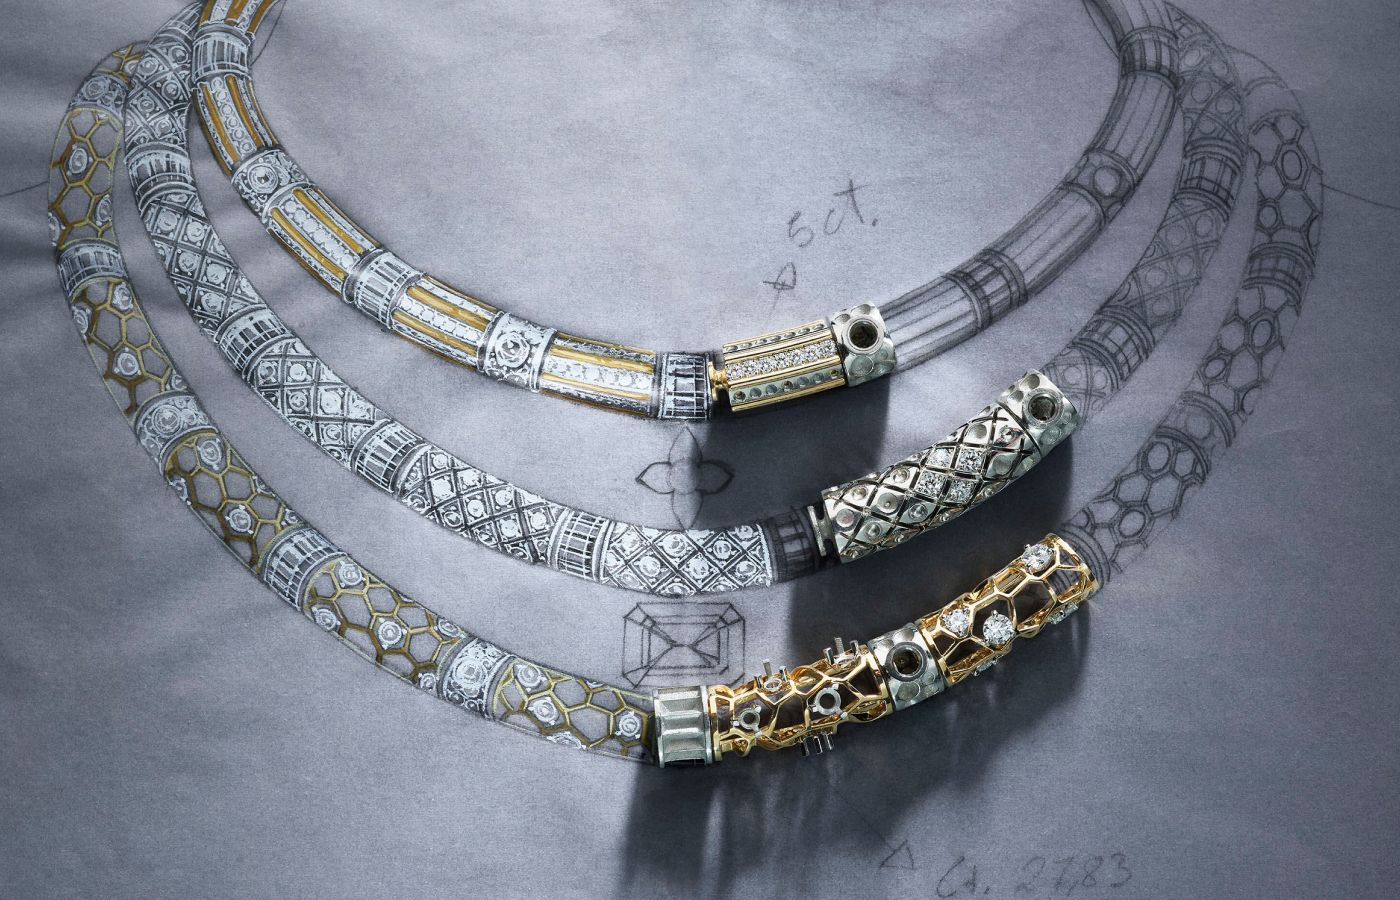 Louis Vuitton's Deep Time high jewellery collection is a dazzling